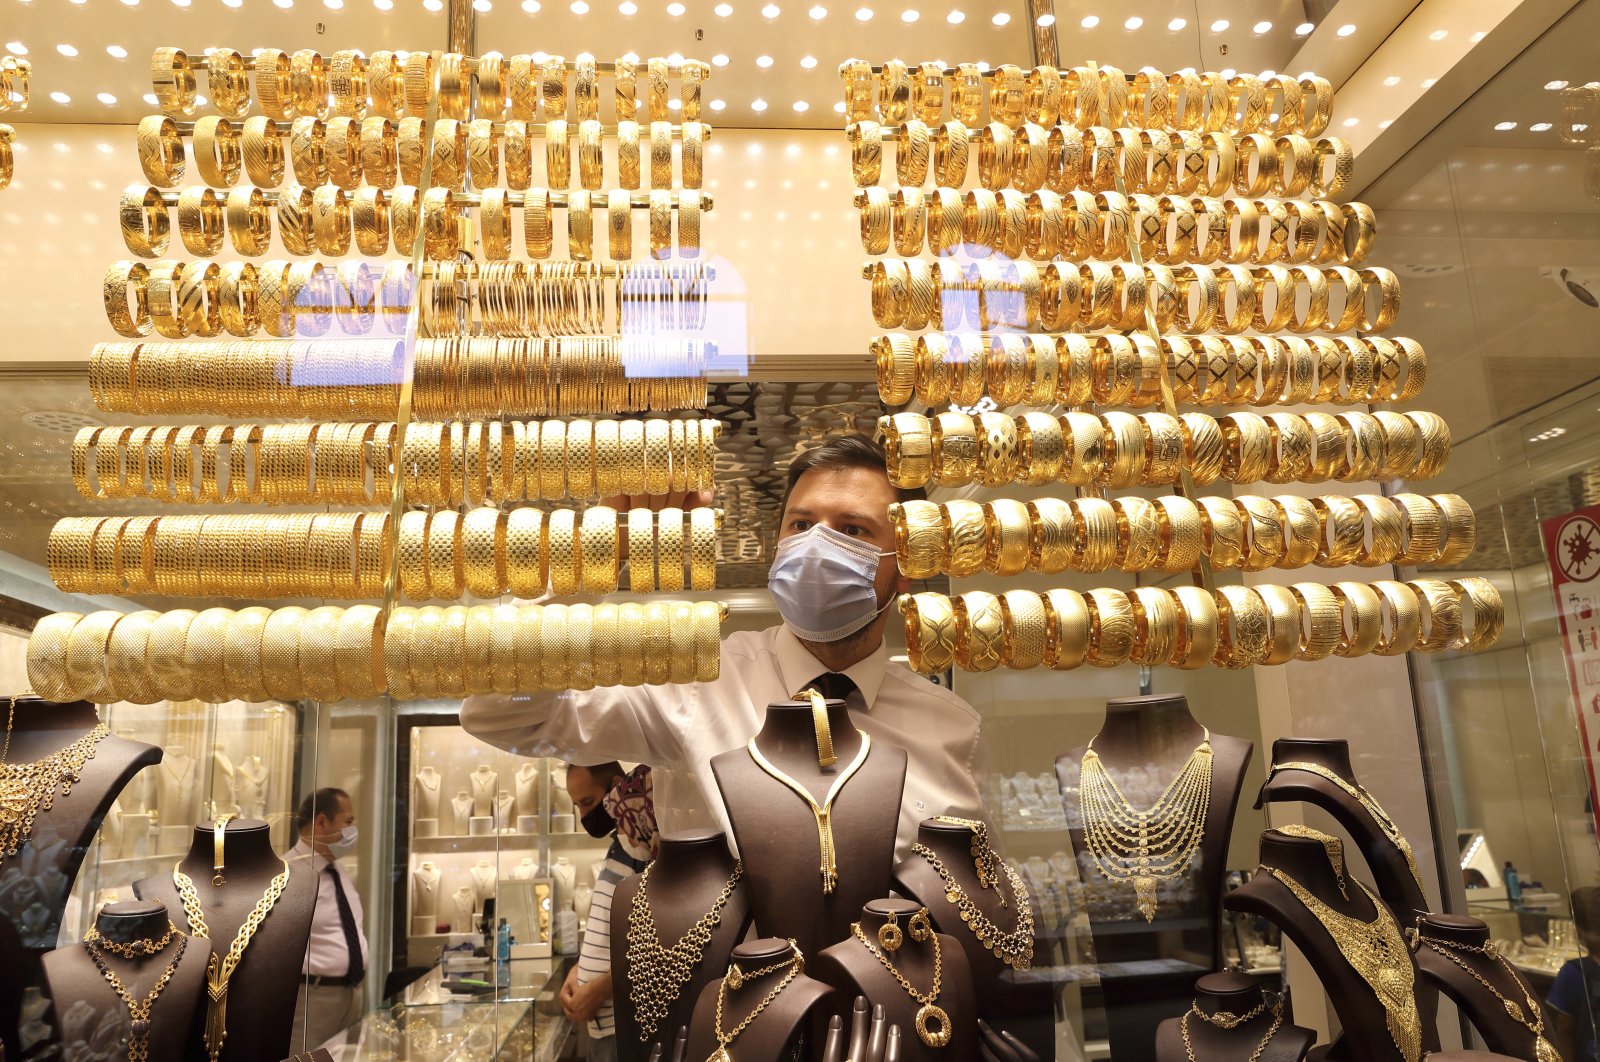 A goldsmith wearing a protective mask arranges golden bangles at a jewelry shop at the Grand Bazaar in Istanbul, Turkey, Aug. 6, 2020. (Reuters Photo)